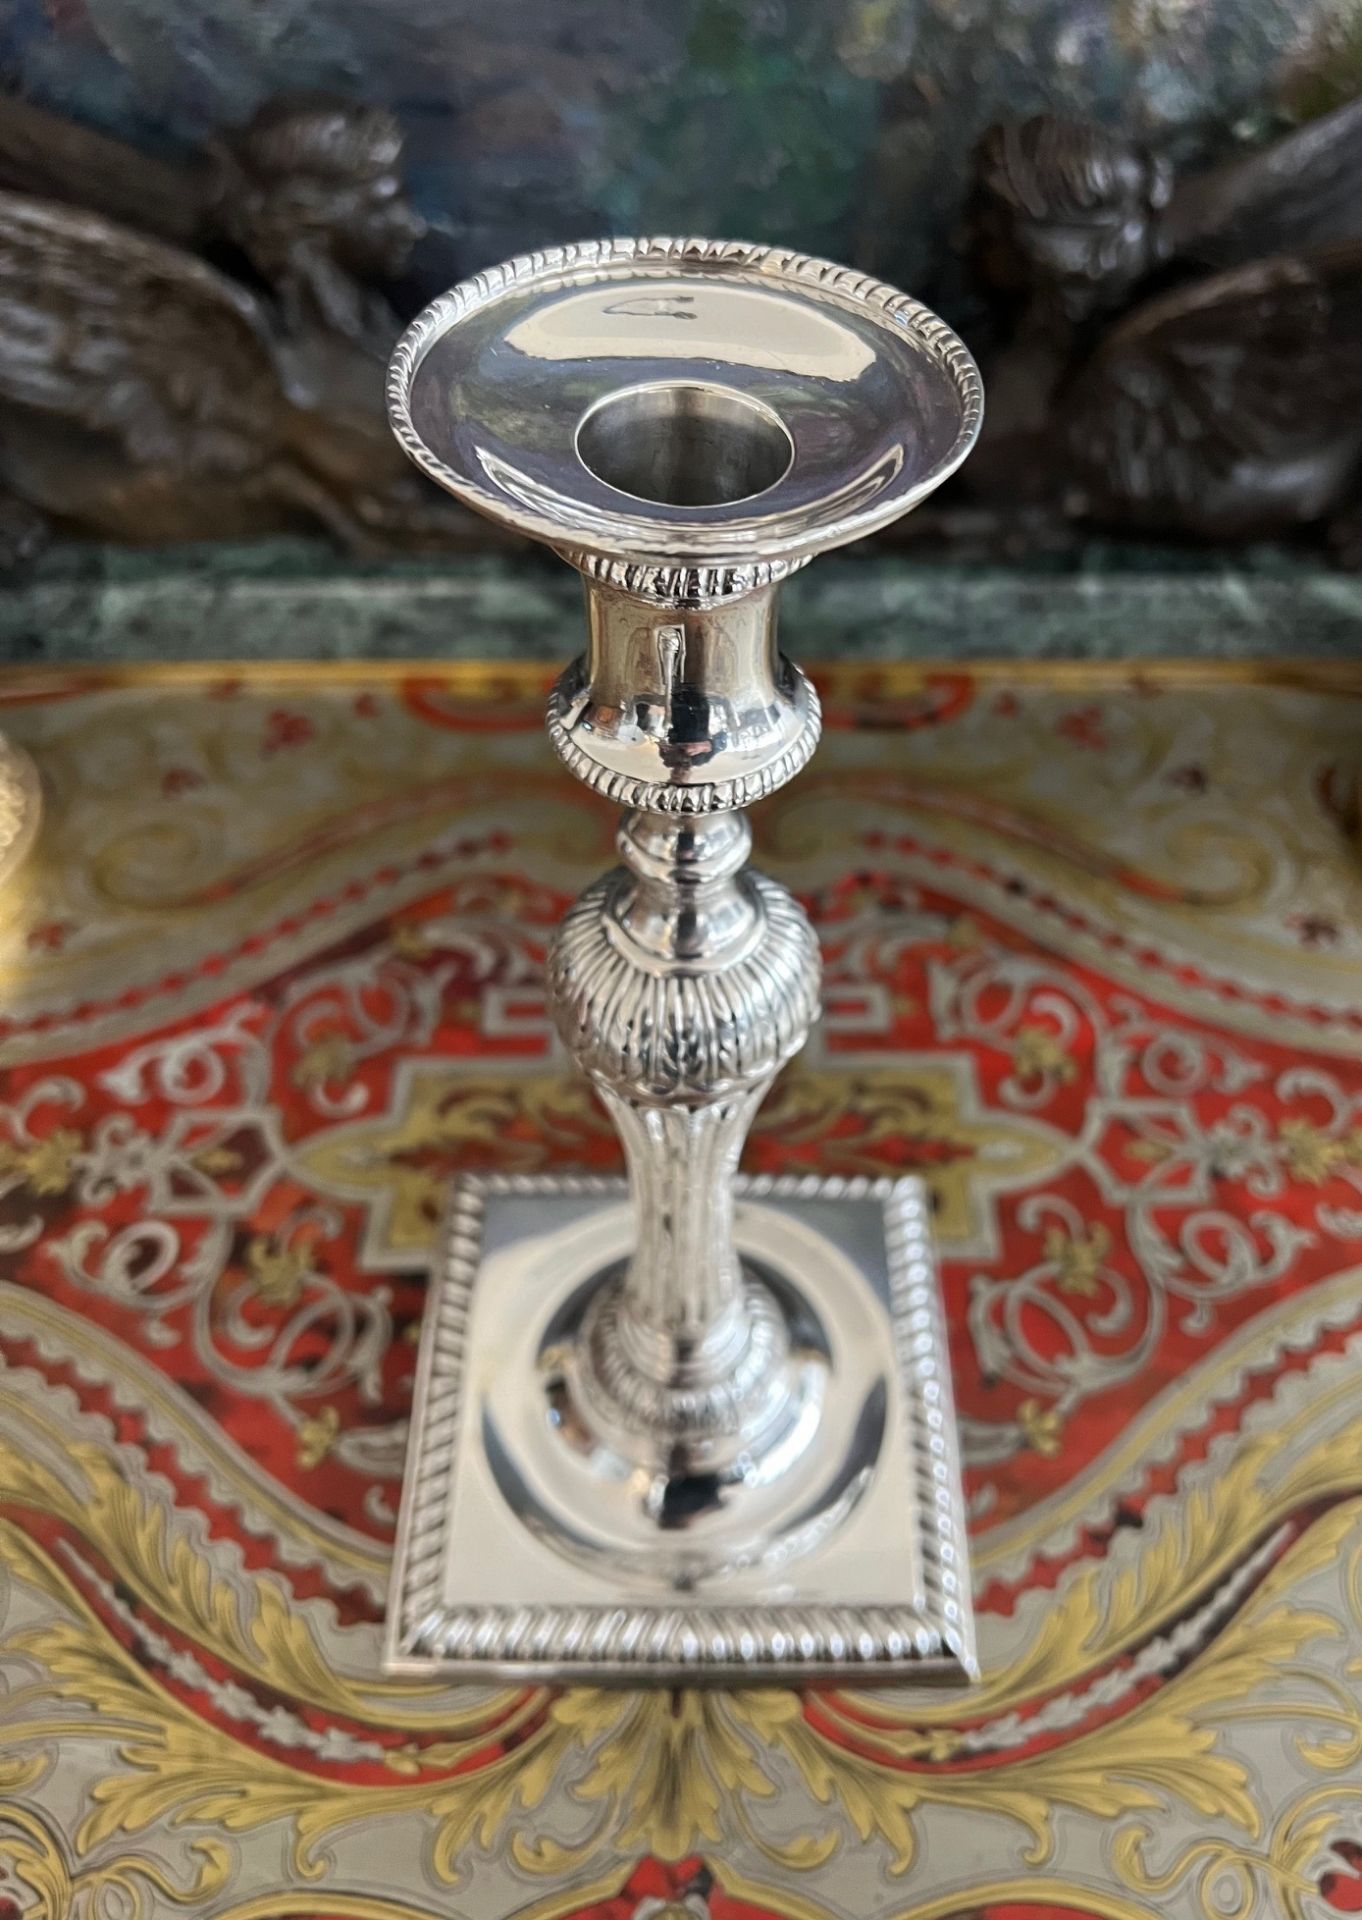 A FINE PAIR OF 18TH CENTURY STERLING SILVER CANDLESTICKS, LONDON, 1772 JOHN ARNELL - Image 3 of 9